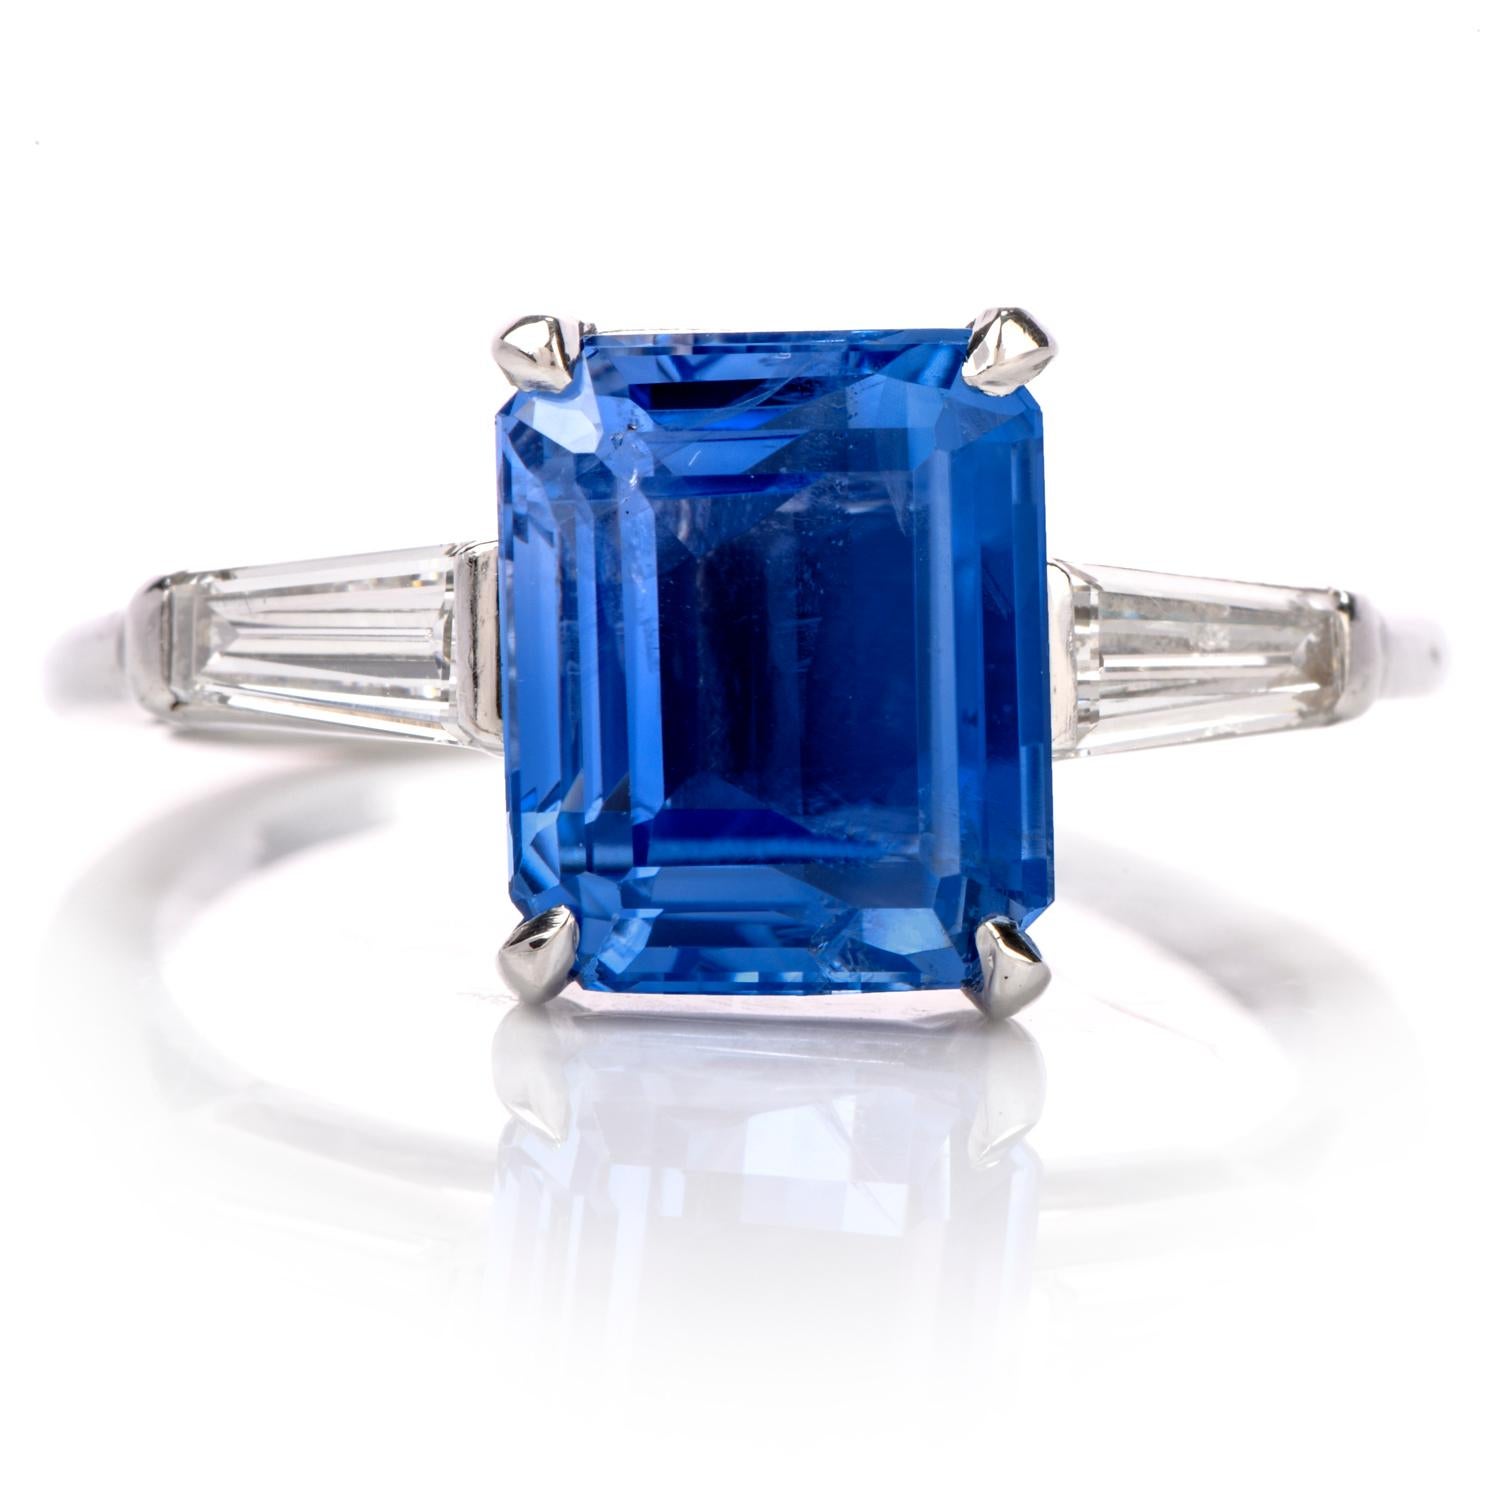 Create a Statement with this stunning Natural Sapphire Ring.

Centered in this ring of love is one Cornflower Blue Natural

No Heat, No treatments natural  GIA certified Sri Lankan Sapphire measuring approx 10.02 x 8.26 x 5.09mm and weighing 4.75